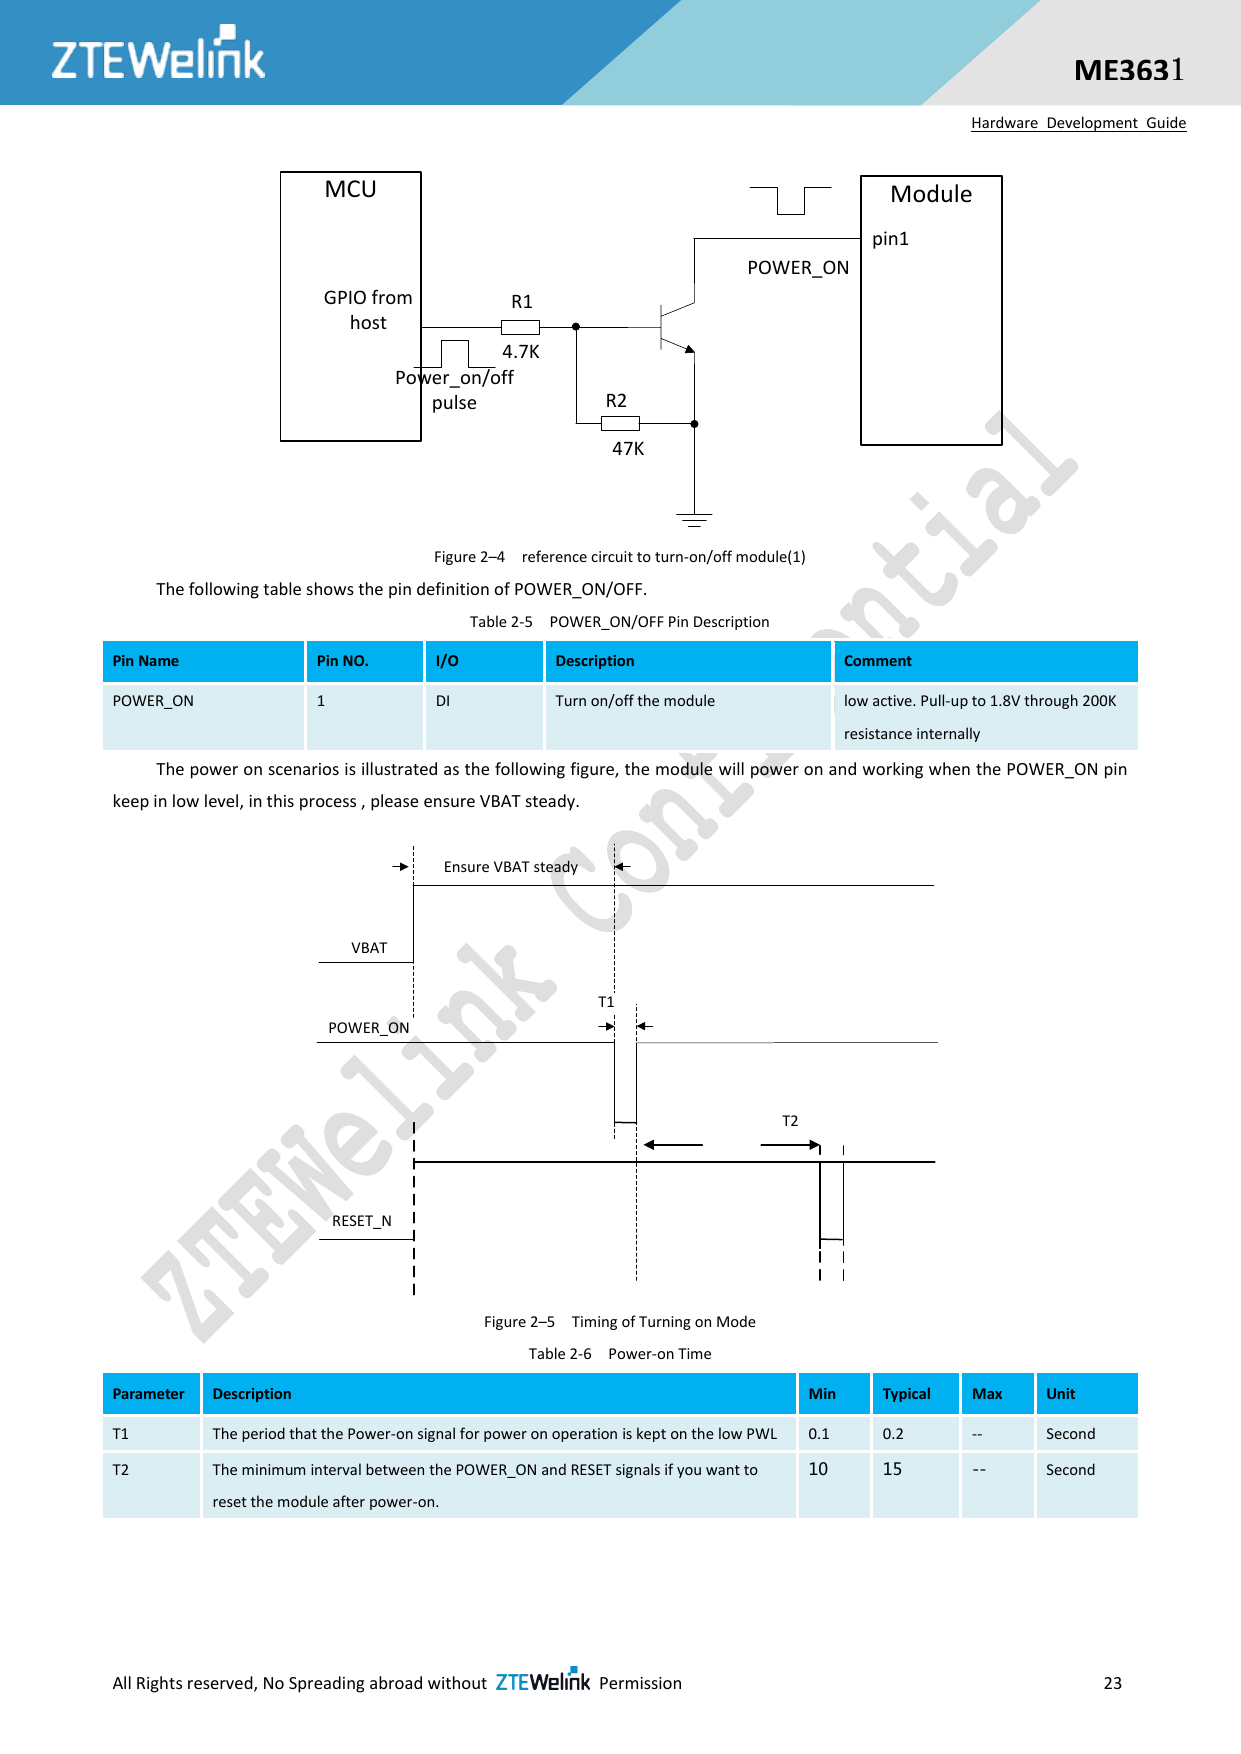  All Rights reserved, No Spreading abroad without    Permission                     23  ME3631 Hardware  Development  Guide Power_on/off pulse R2R1GPIO from host4.7K47KPOWER_ONModulepin1MCU Figure 2–4  reference circuit to turn-on/off module(1) The following table shows the pin definition of POWER_ON/OFF. Table 2-5  POWER_ON/OFF Pin Description Pin Name Pin NO. I/O Description Comment POWER_ON 1 DI Turn on/off the module low active. Pull-up to 1.8V through 200K resistance internally The power on scenarios is illustrated as the following figure, the module will power on and working when the POWER_ON pin keep in low level, in this process , please ensure VBAT steady. VBATPOWER_ONT1Ensure VBAT steadyT2RESET_N Figure 2–5  Timing of Turning on Mode Table 2-6  Power-on Time Parameter Description Min Typical Max Unit T1 The period that the Power-on signal for power on operation is kept on the low PWL 0.1 0.2 -- Second T2 The minimum interval between the POWER_ON and RESET signals if you want to reset the module after power-on.   10 15 -- Second  